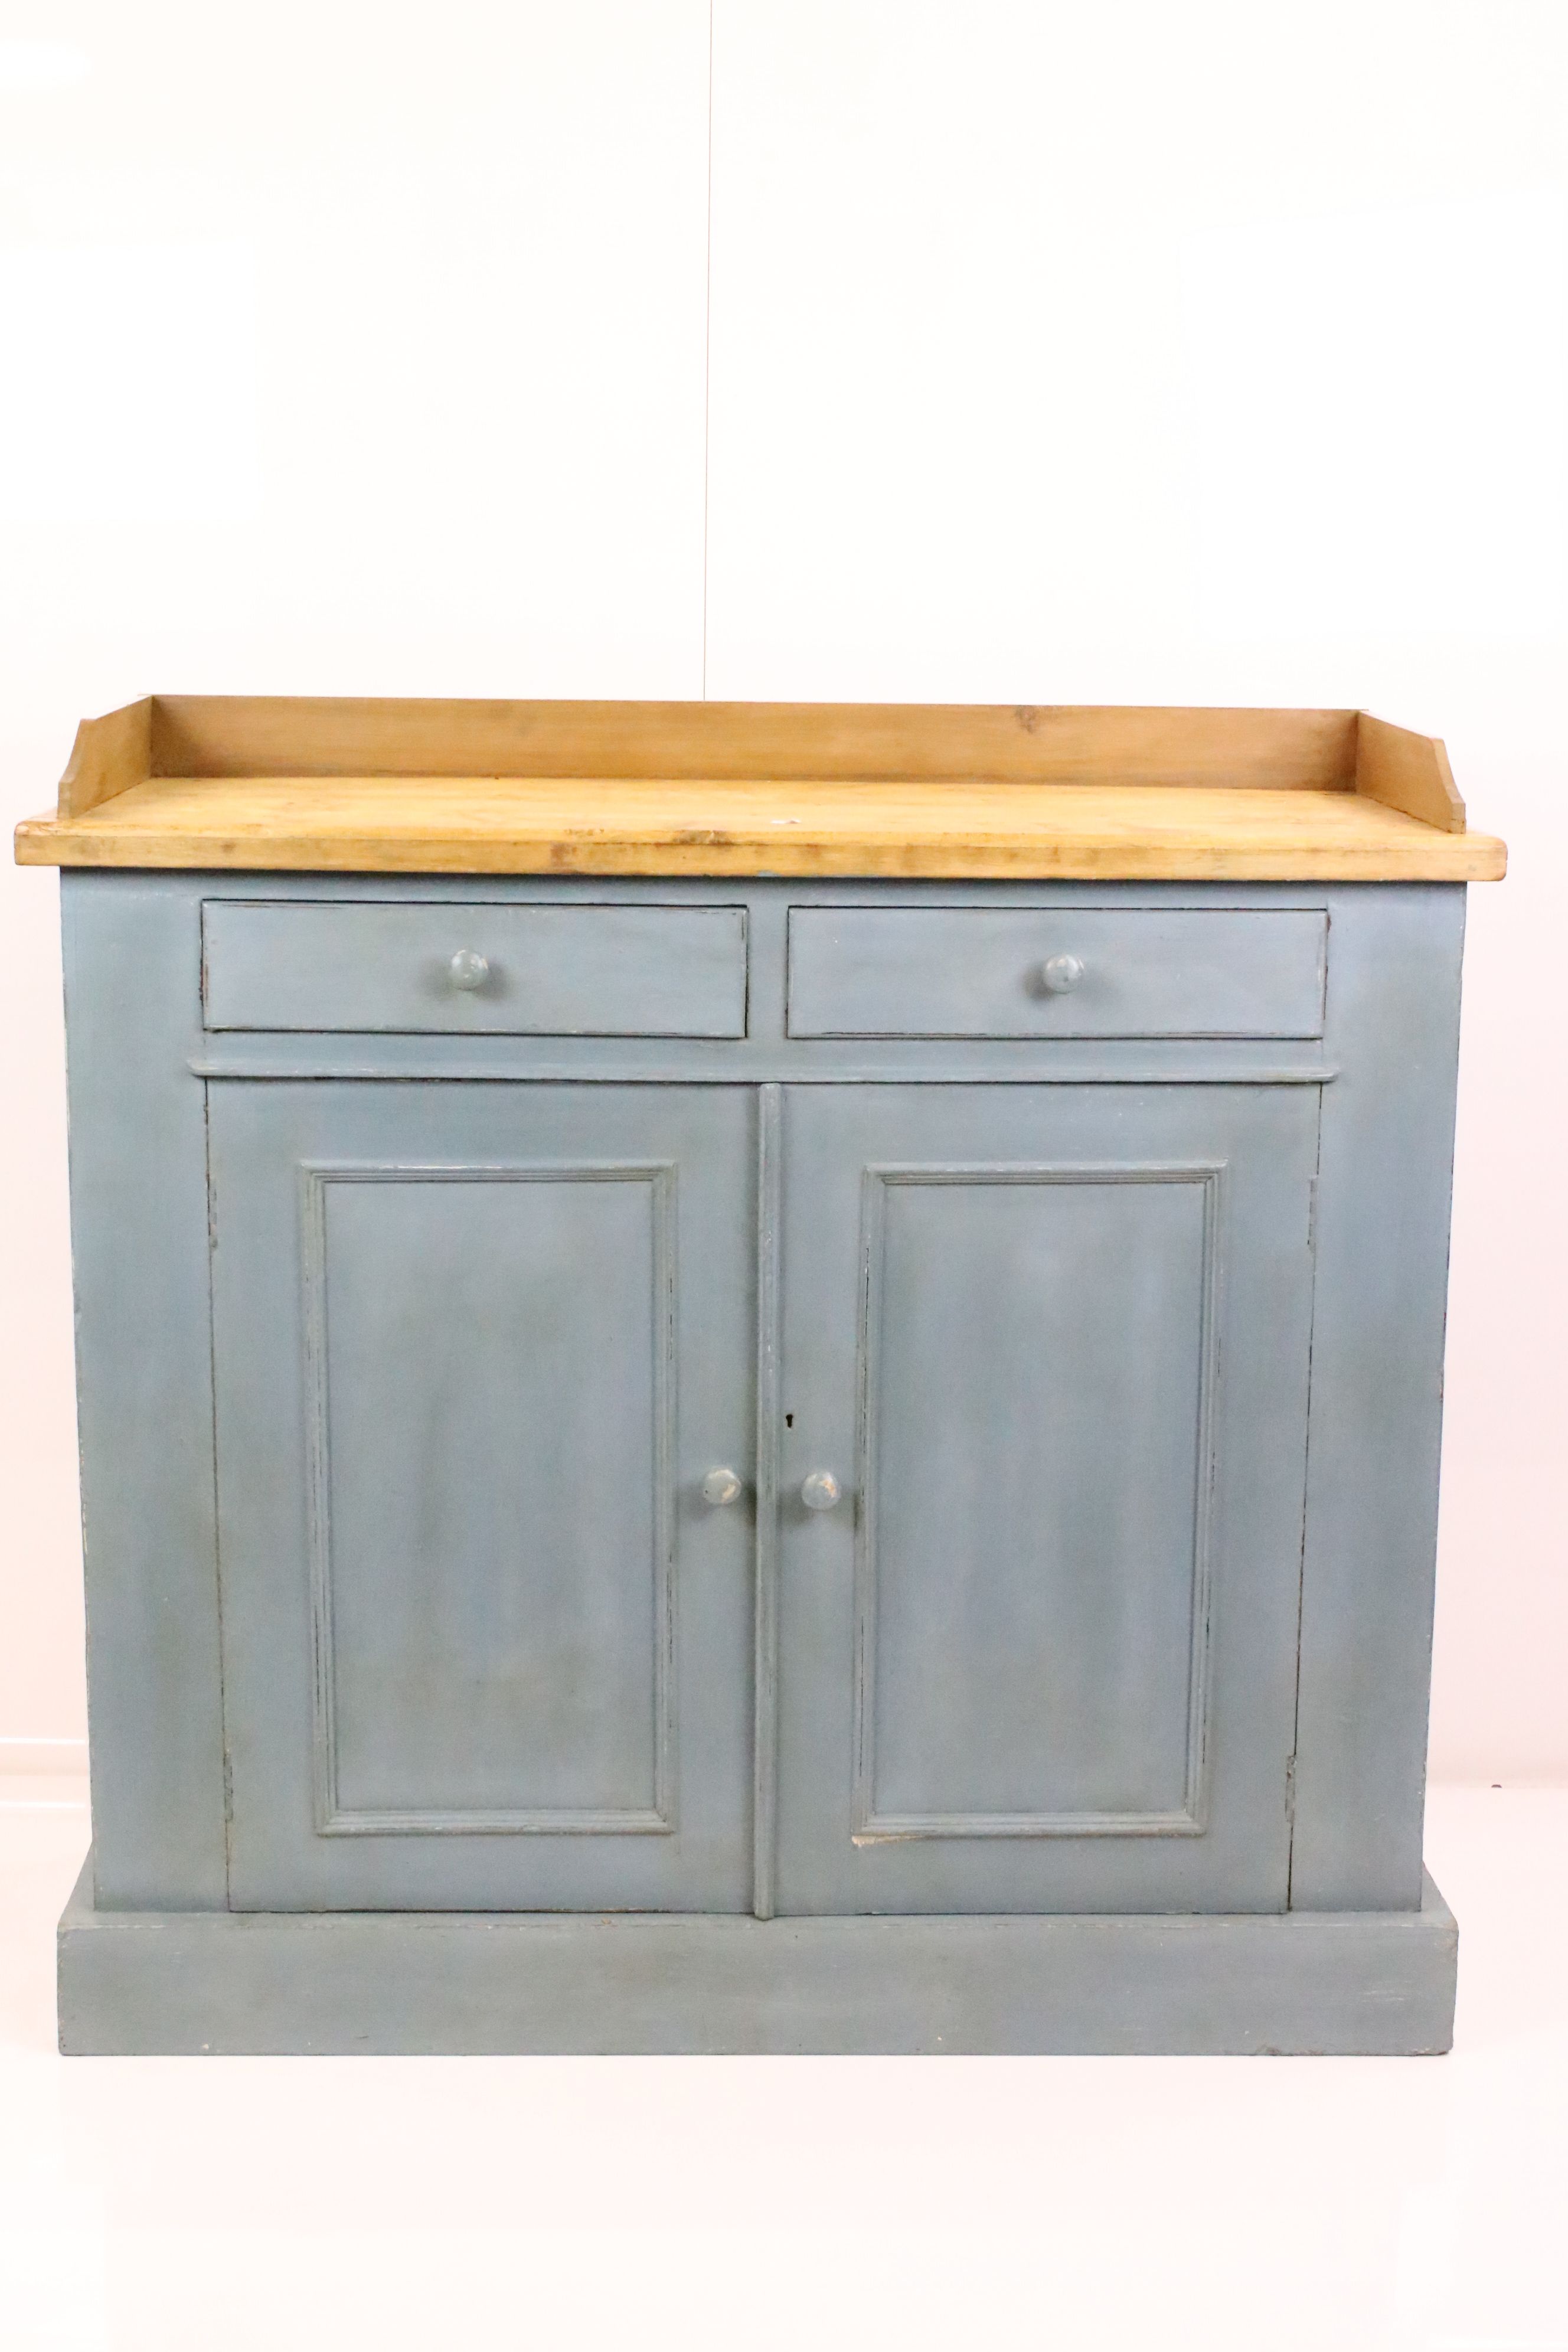 19th century Kitchen Dresser Base with two drawers over two doors, 107cm wide x 42cm deep x 102cm - Image 2 of 6